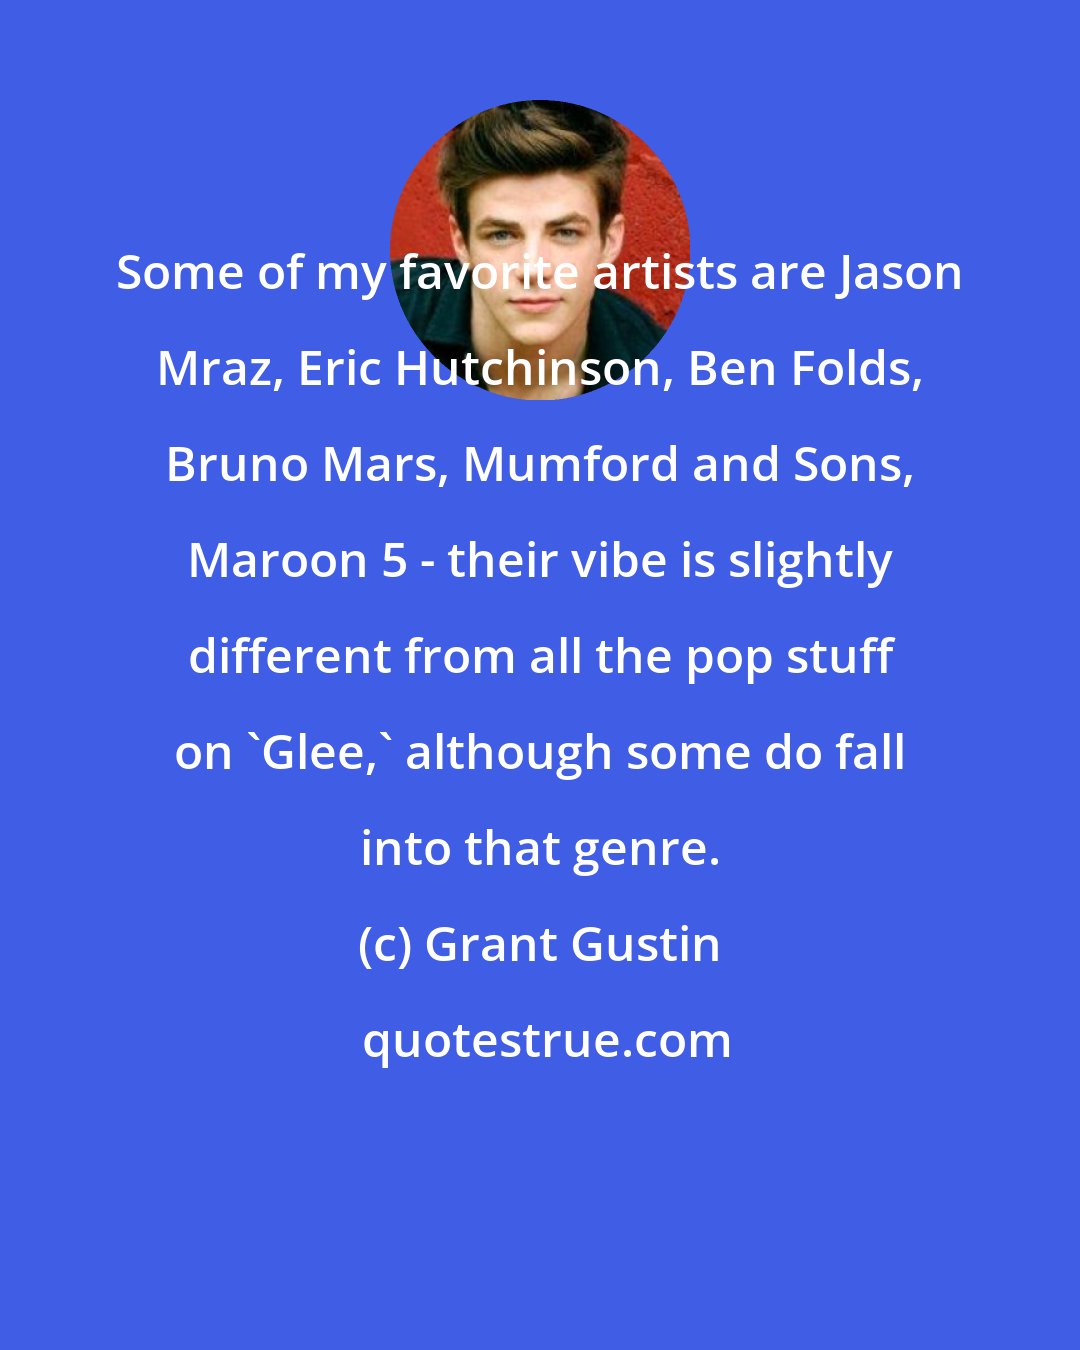 Grant Gustin: Some of my favorite artists are Jason Mraz, Eric Hutchinson, Ben Folds, Bruno Mars, Mumford and Sons, Maroon 5 - their vibe is slightly different from all the pop stuff on 'Glee,' although some do fall into that genre.